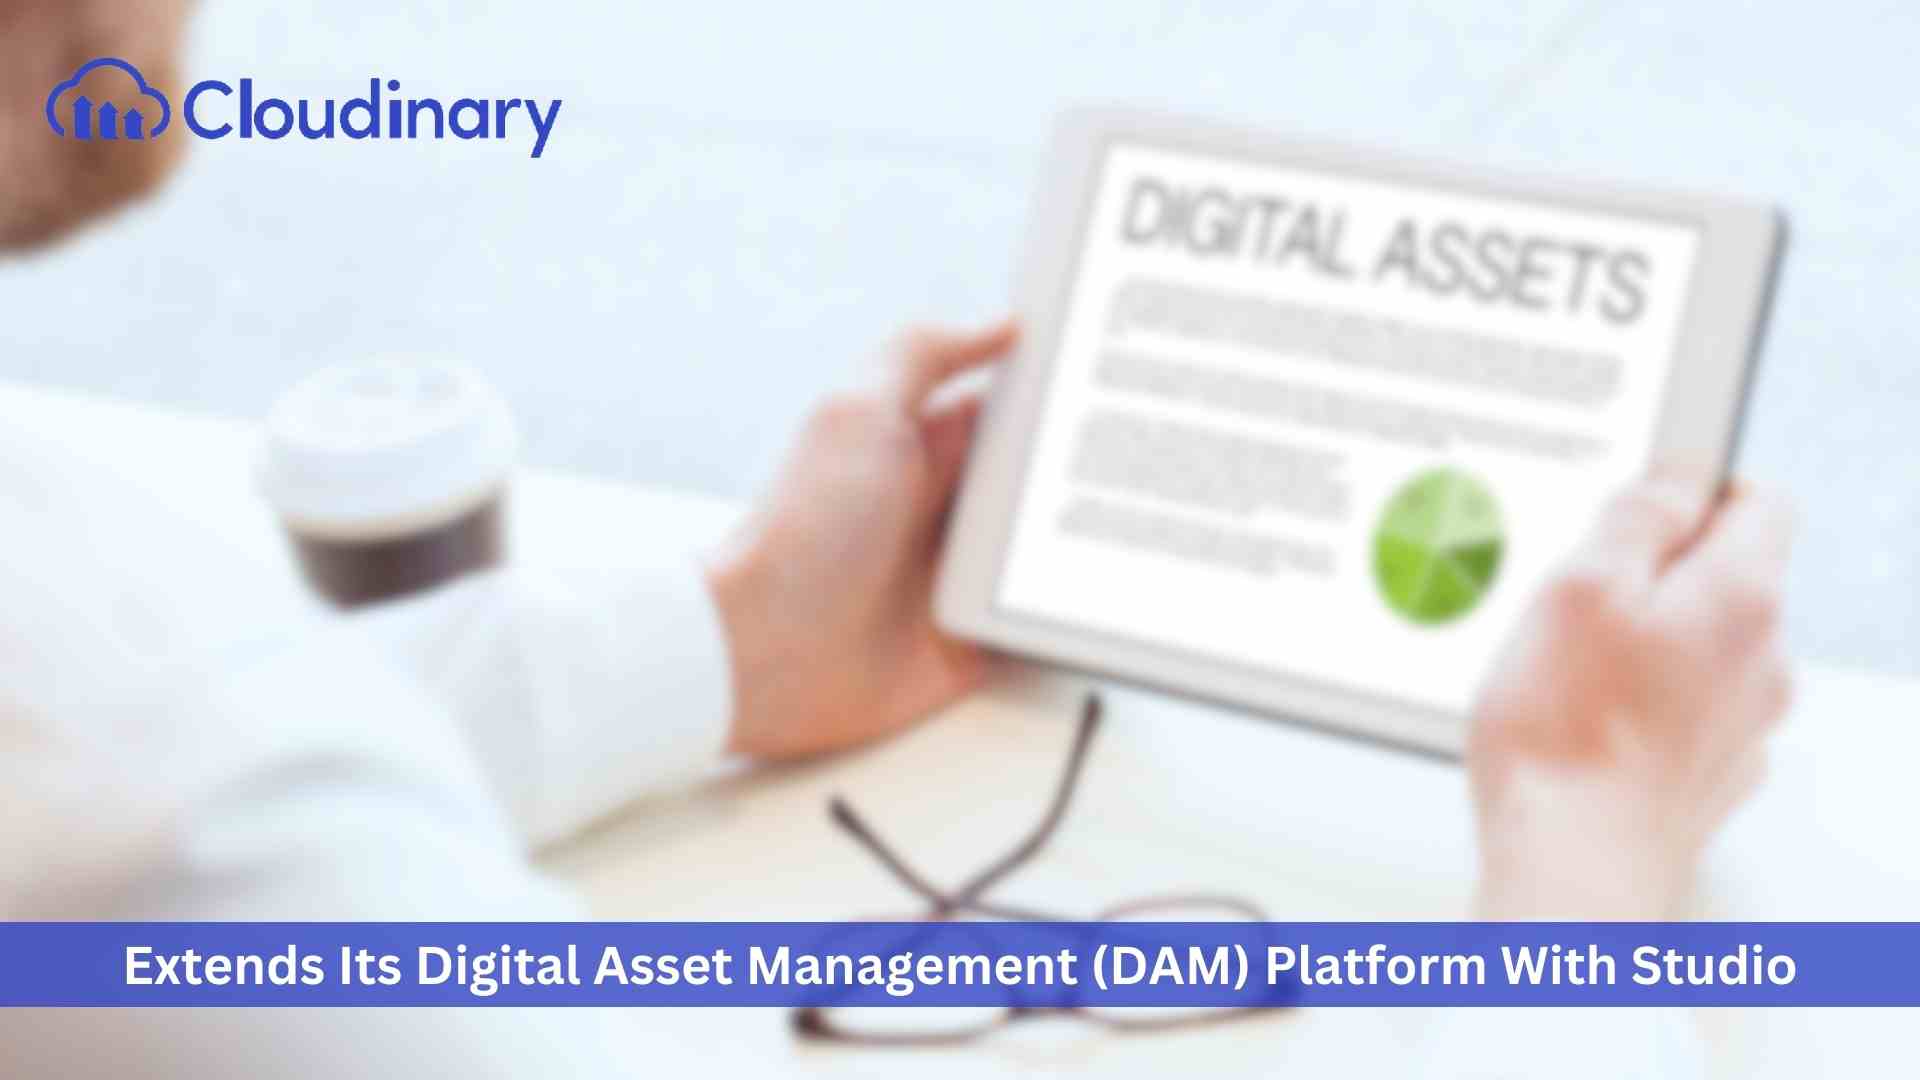 Cloudinary Extends its Digital Asset Management (DAM) Platform with Studio, a Powerful Set of AI Capabilities for Marketers